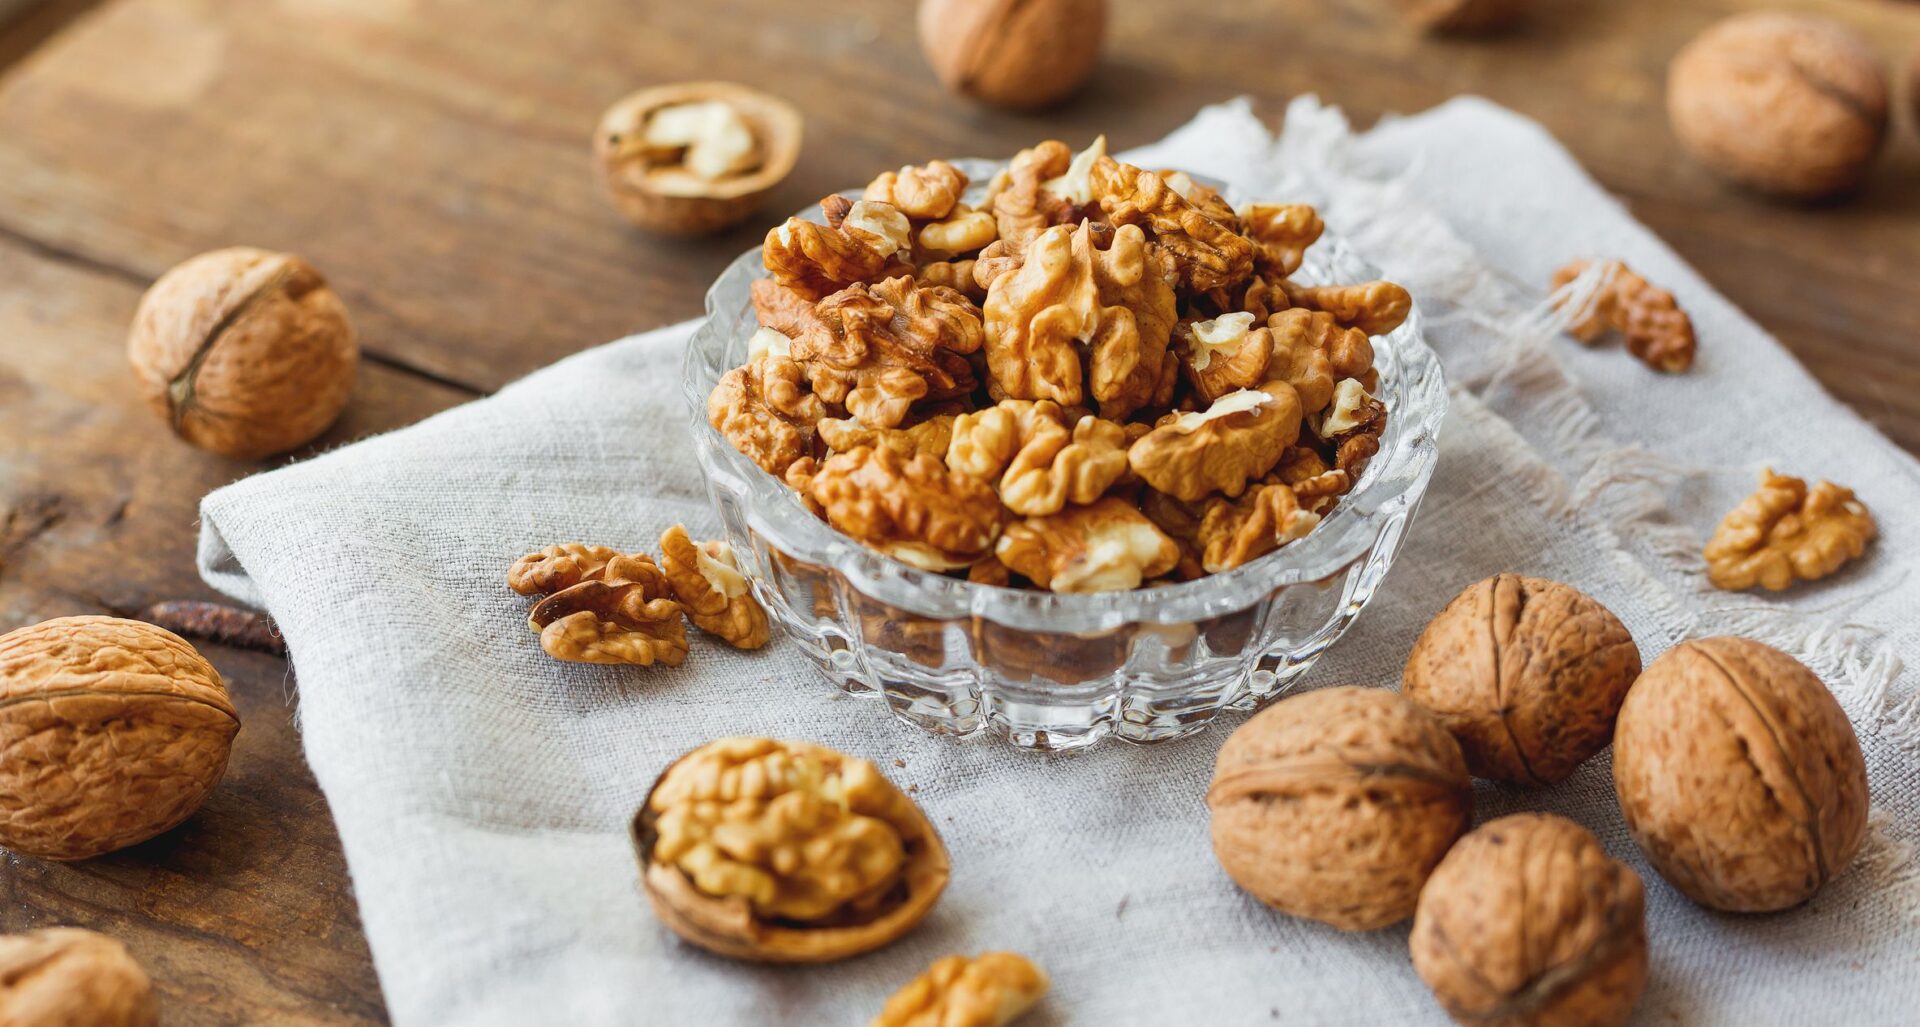 Are Walnuts Good For Men’s Health?